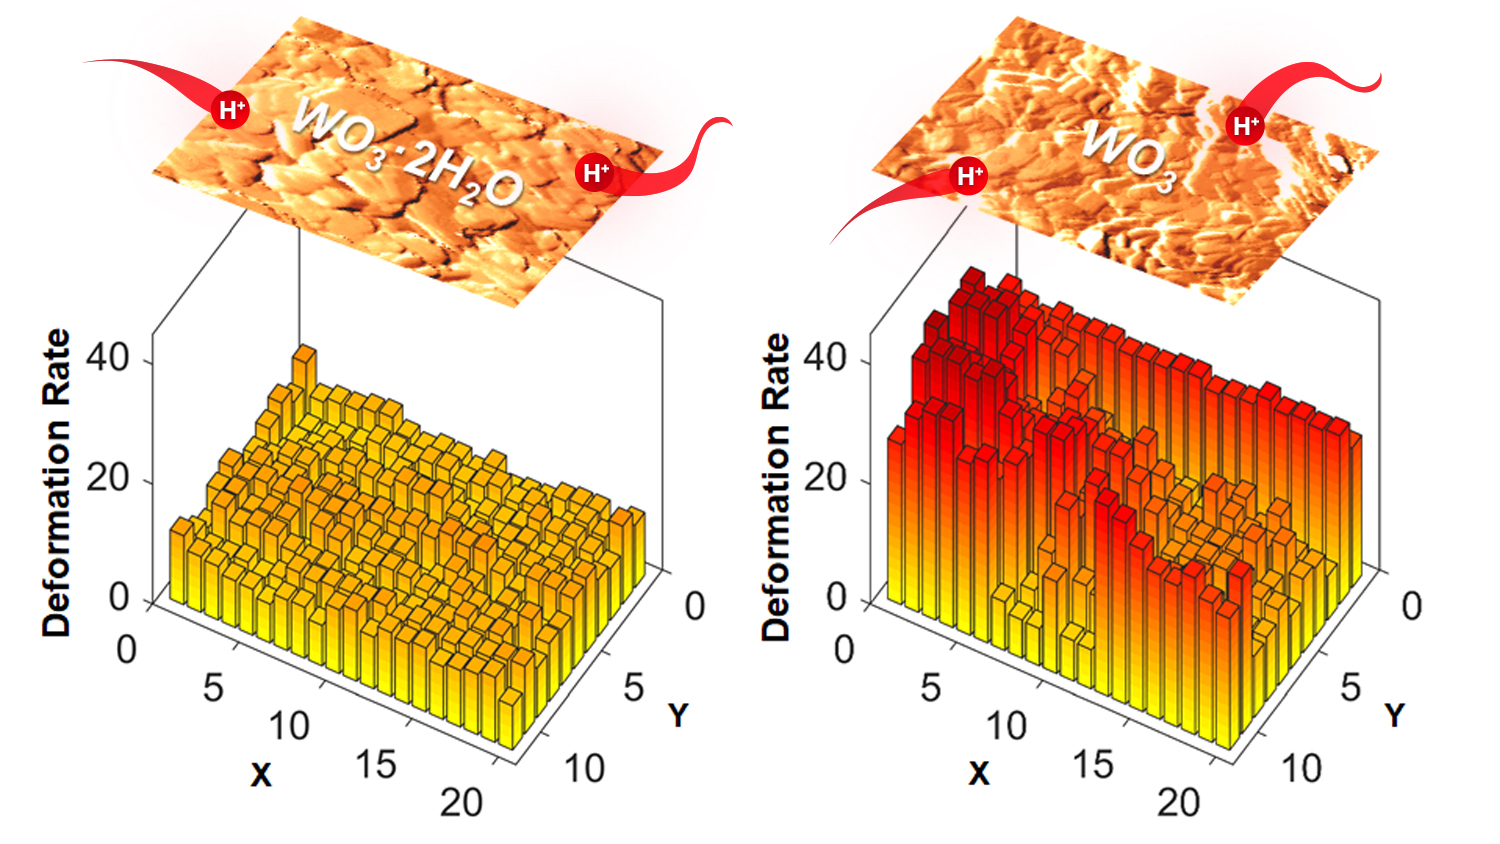 AFM reveals that structural water in tungsten oxide results in smaller deformation rates from ion intercalation, an unexpected finding on the role of structural water that can enable materials with higher power and efficiency energy storage devices.